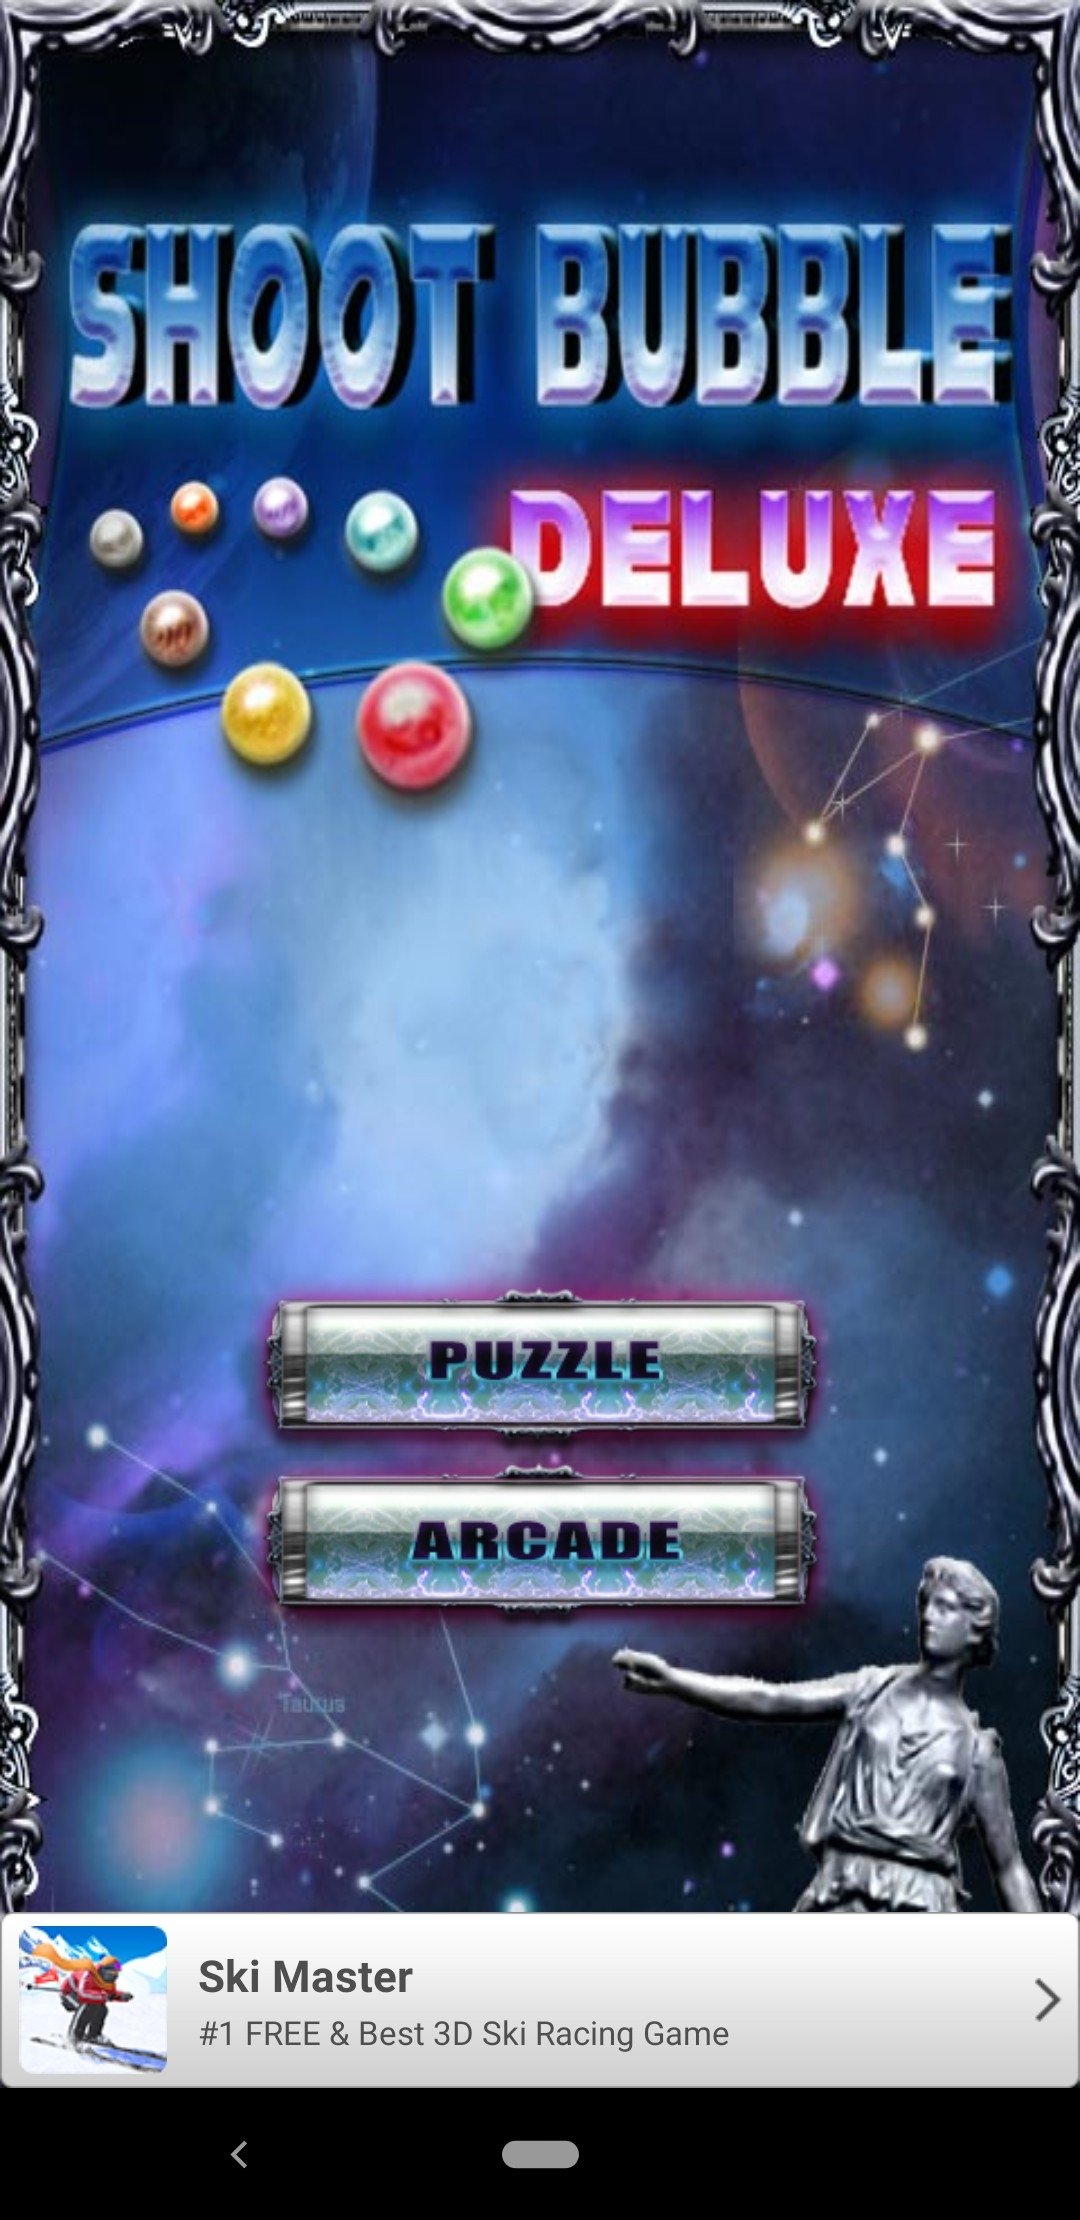 Bubble shooter deluxe game